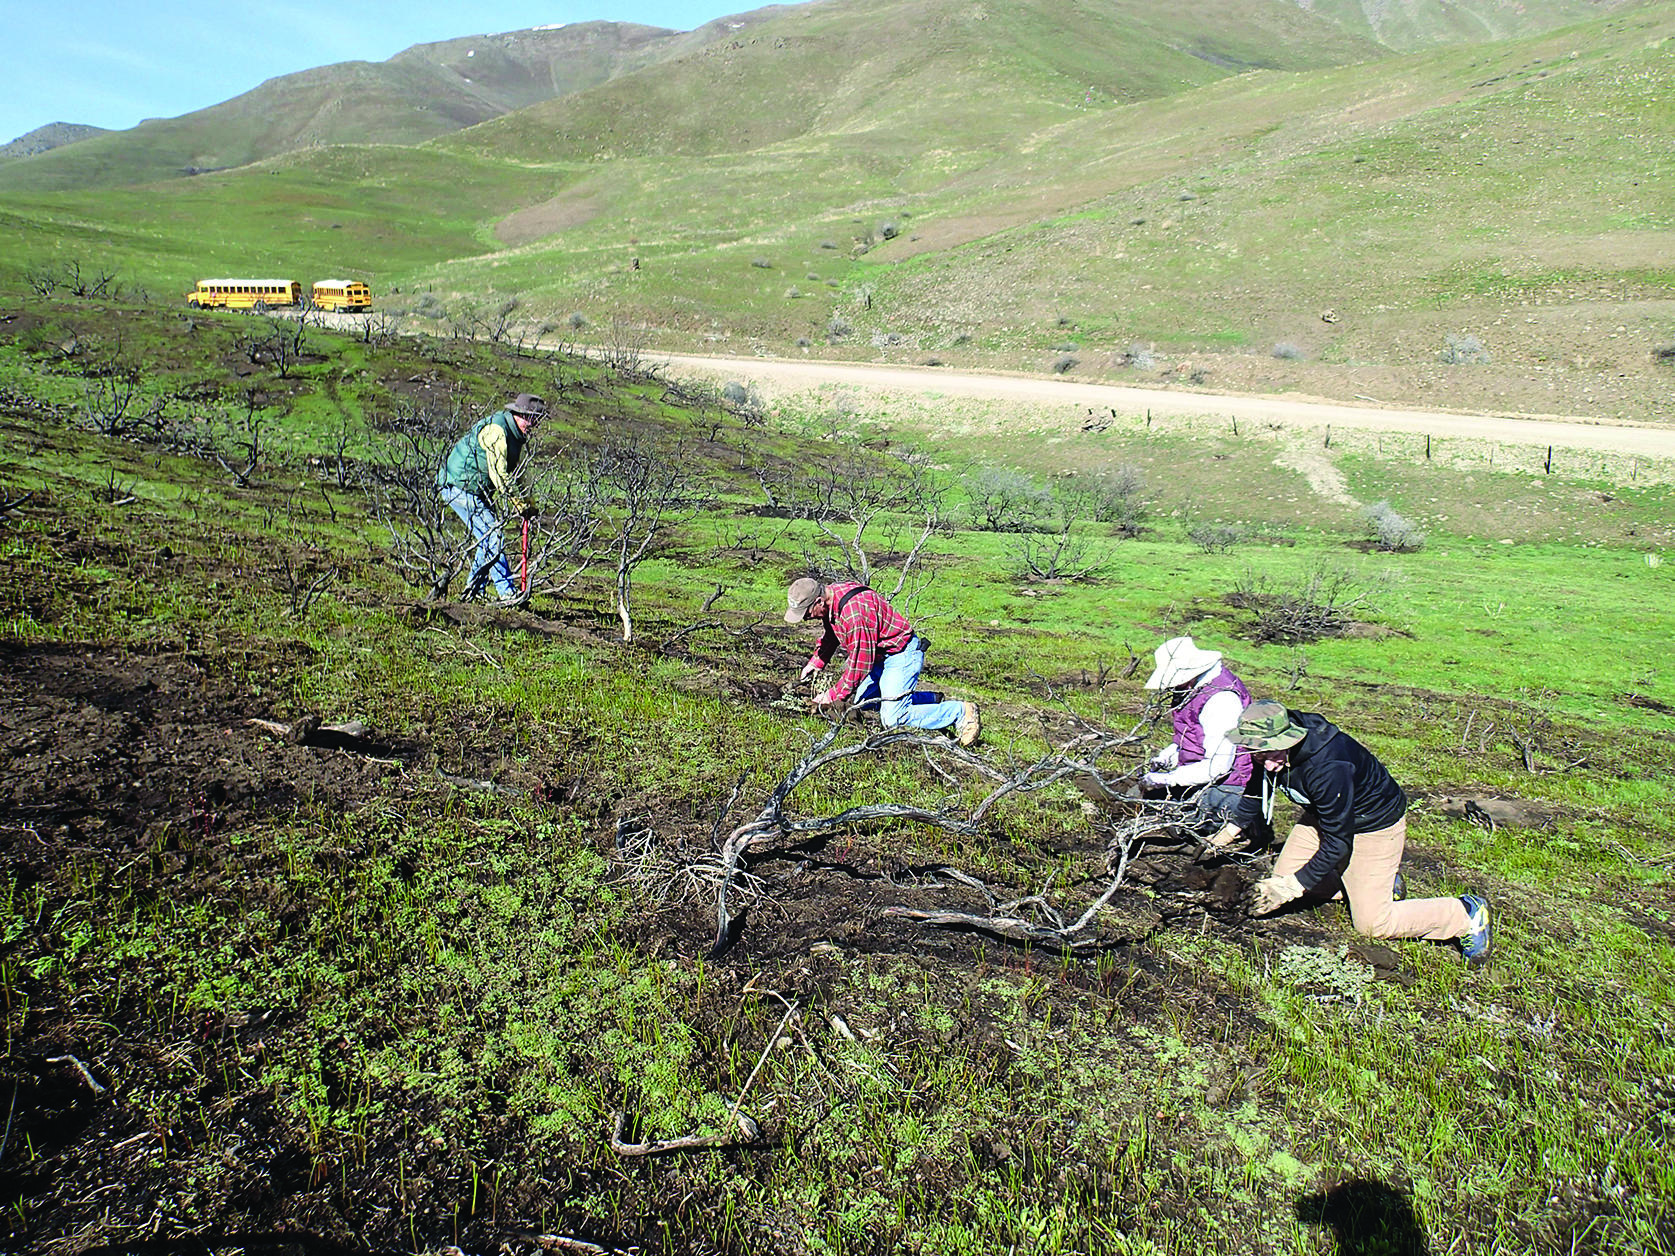 4 people on hands and knees planting on hillside